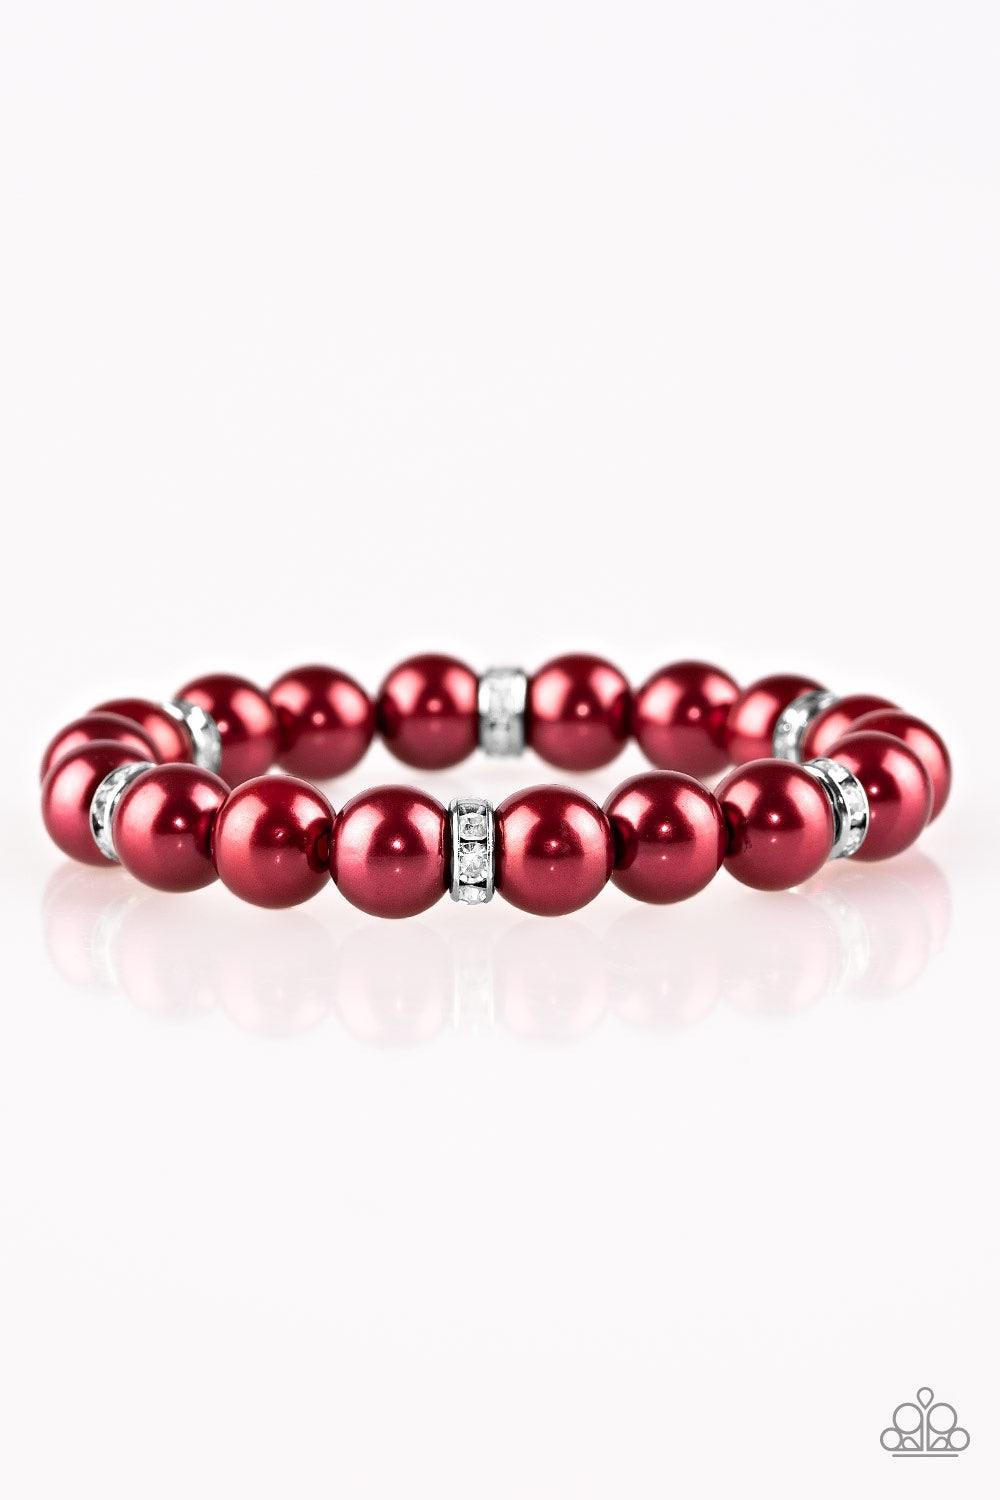 Paparazzi Accessories Exquisitely Elite - Red Classic red pearls and glittery white rhinestone encrusted rings are threaded along a stretchy band, creating a timeless centerpiece around the wrist. Jewelry